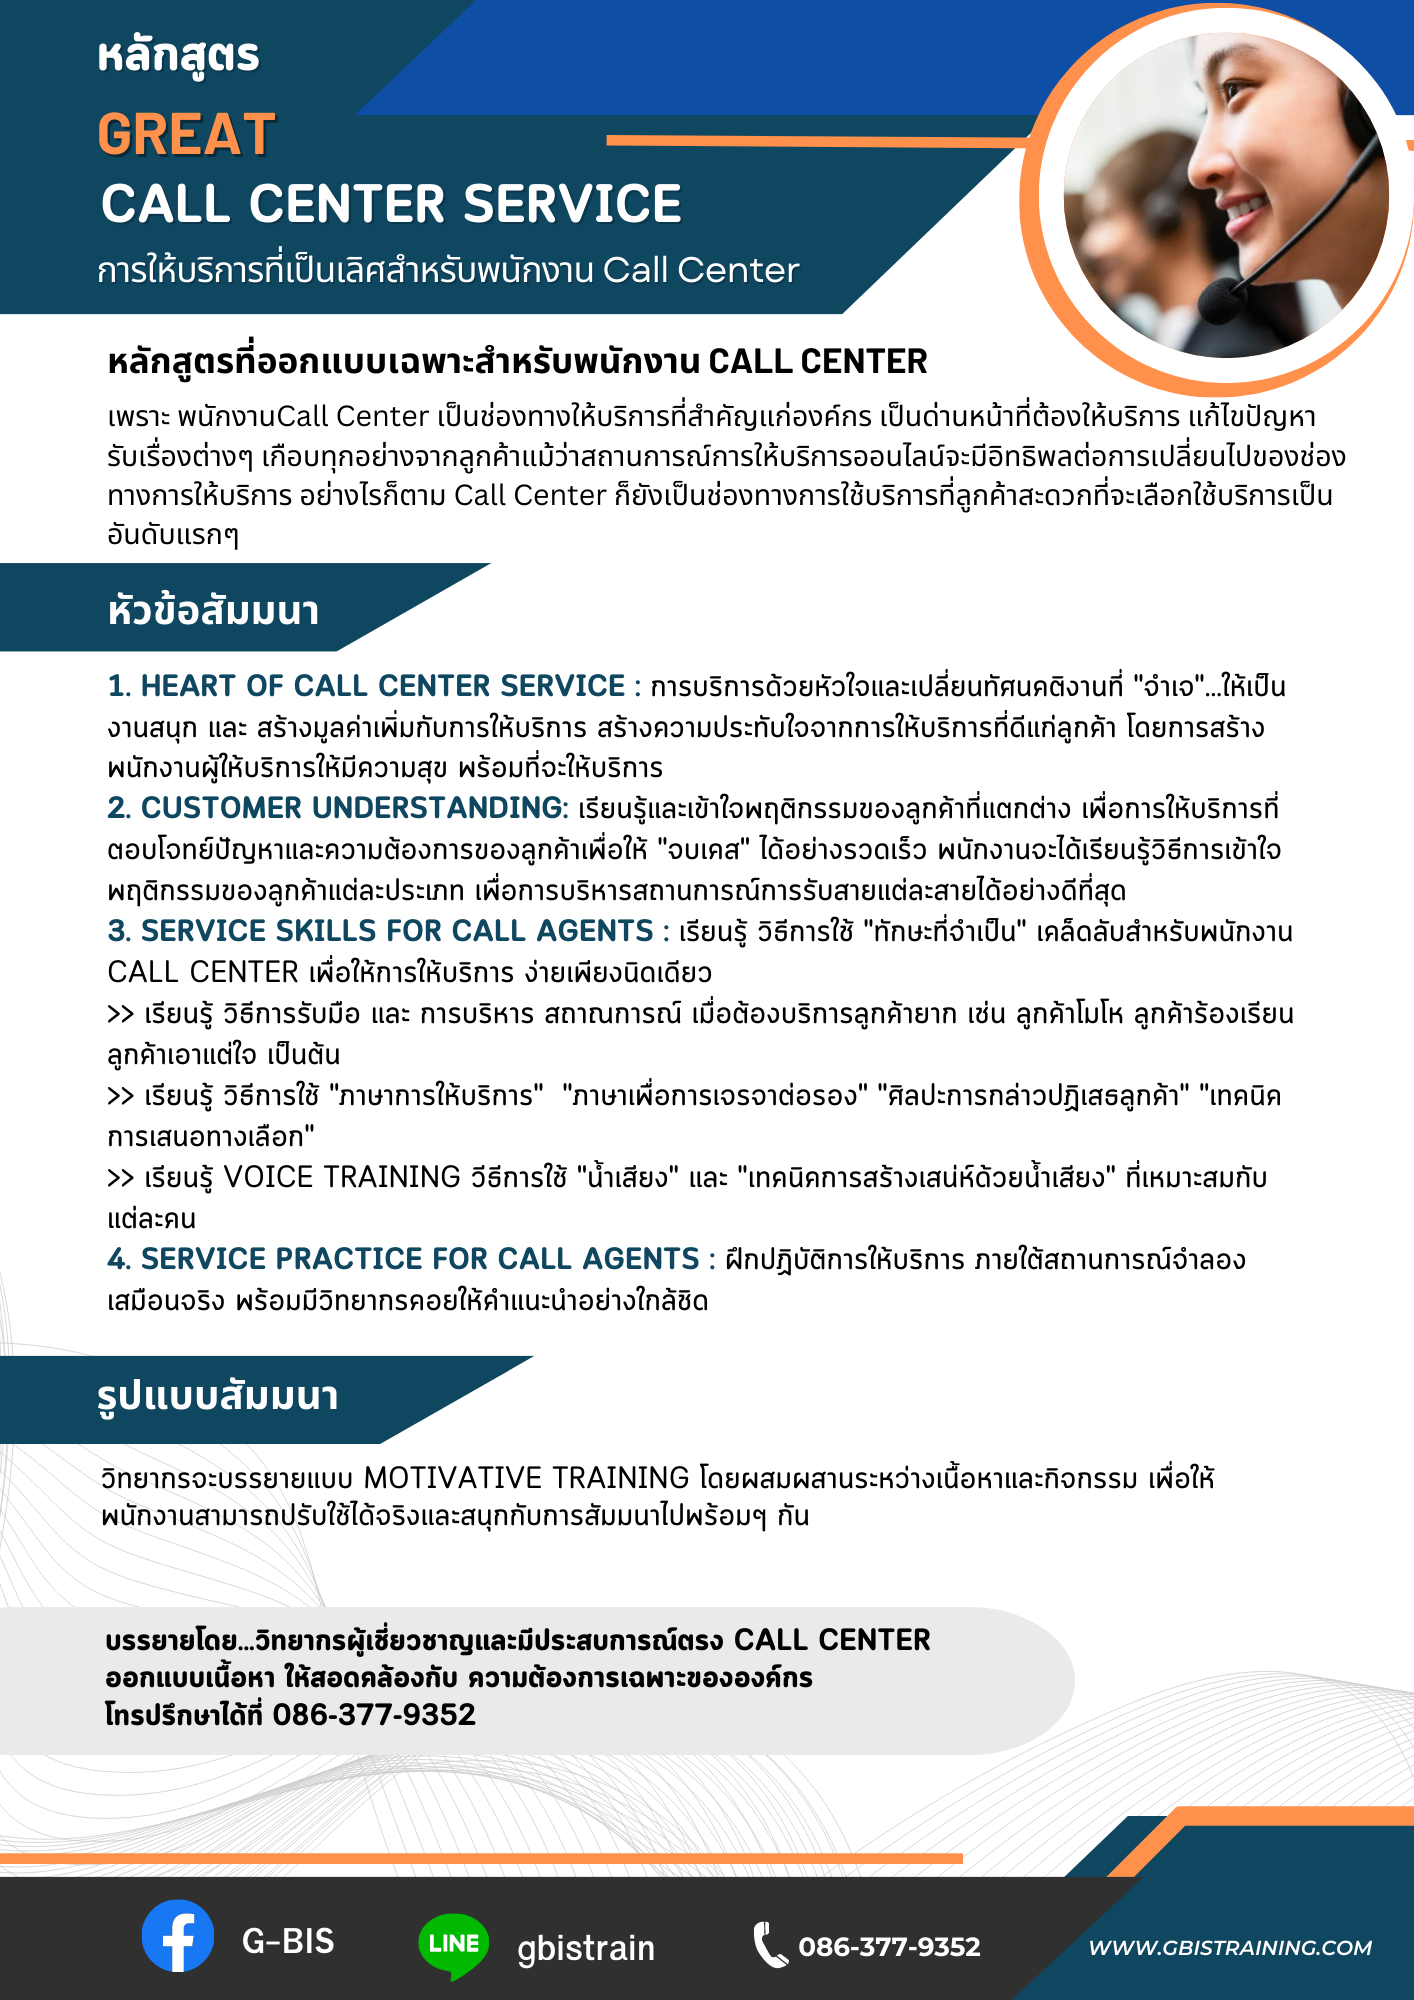 Great Call Center เนื้อใน N.png (734 KB)